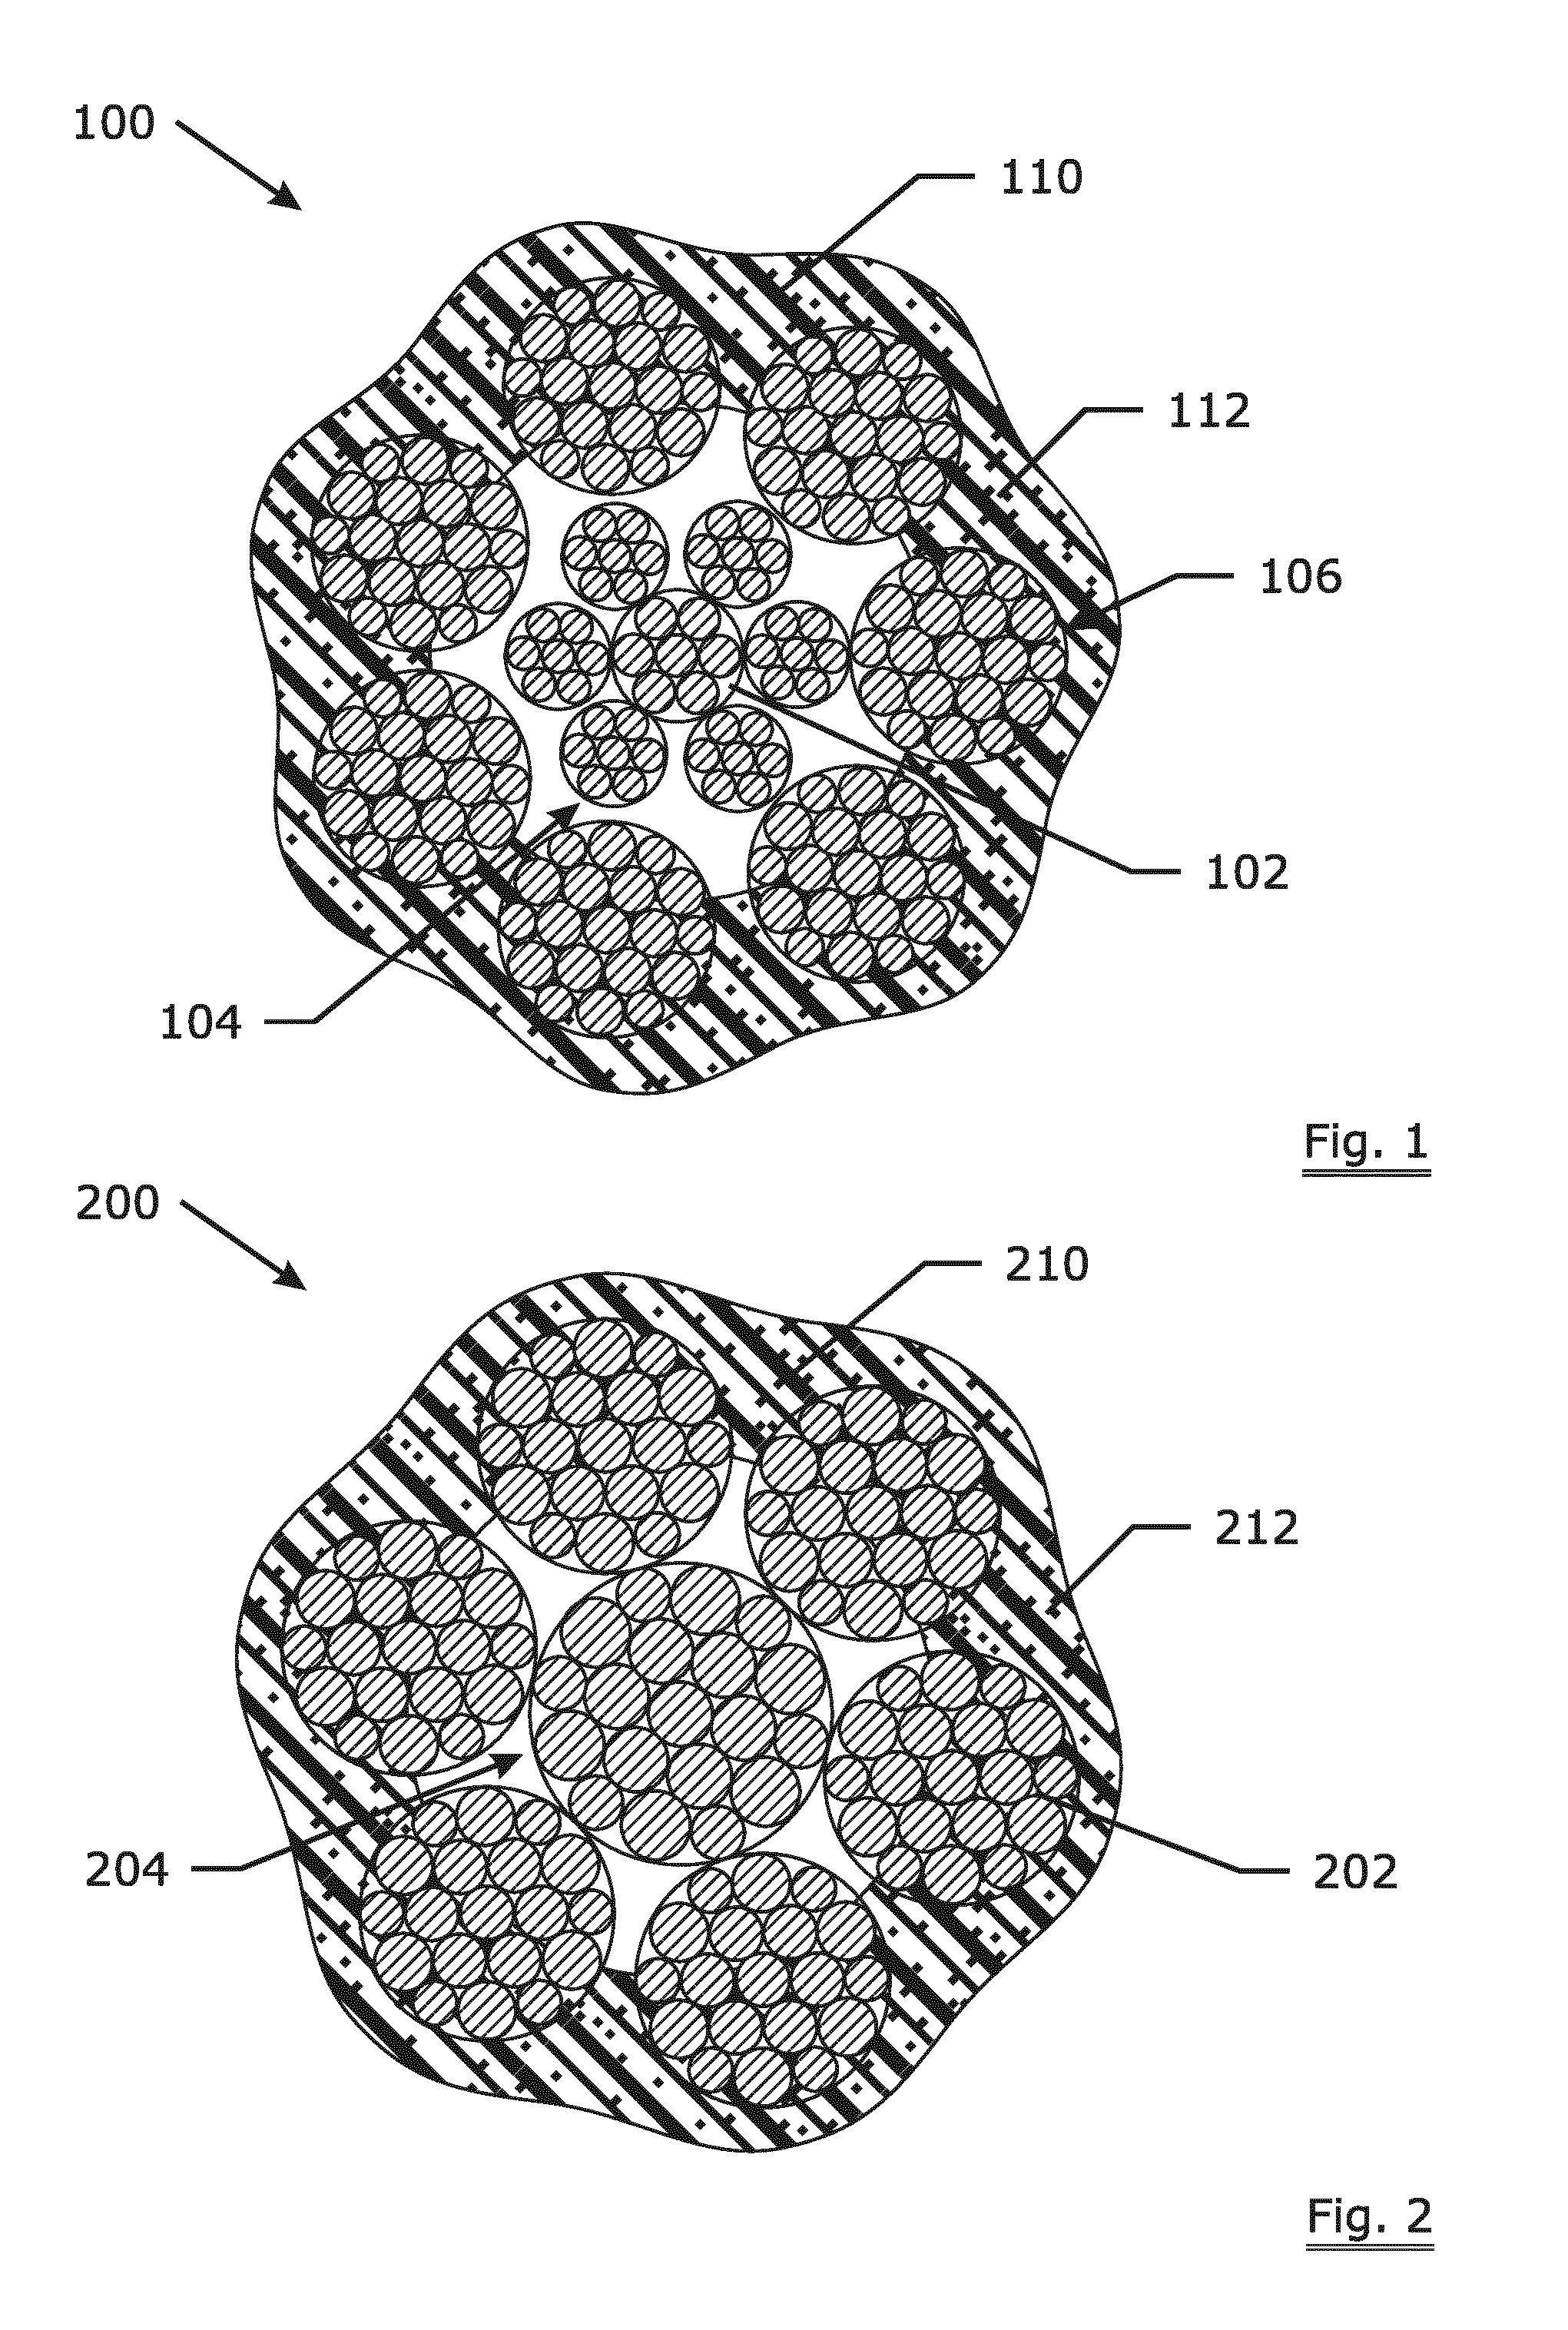 Load bearing assembly comprising a steel rope and a jacket